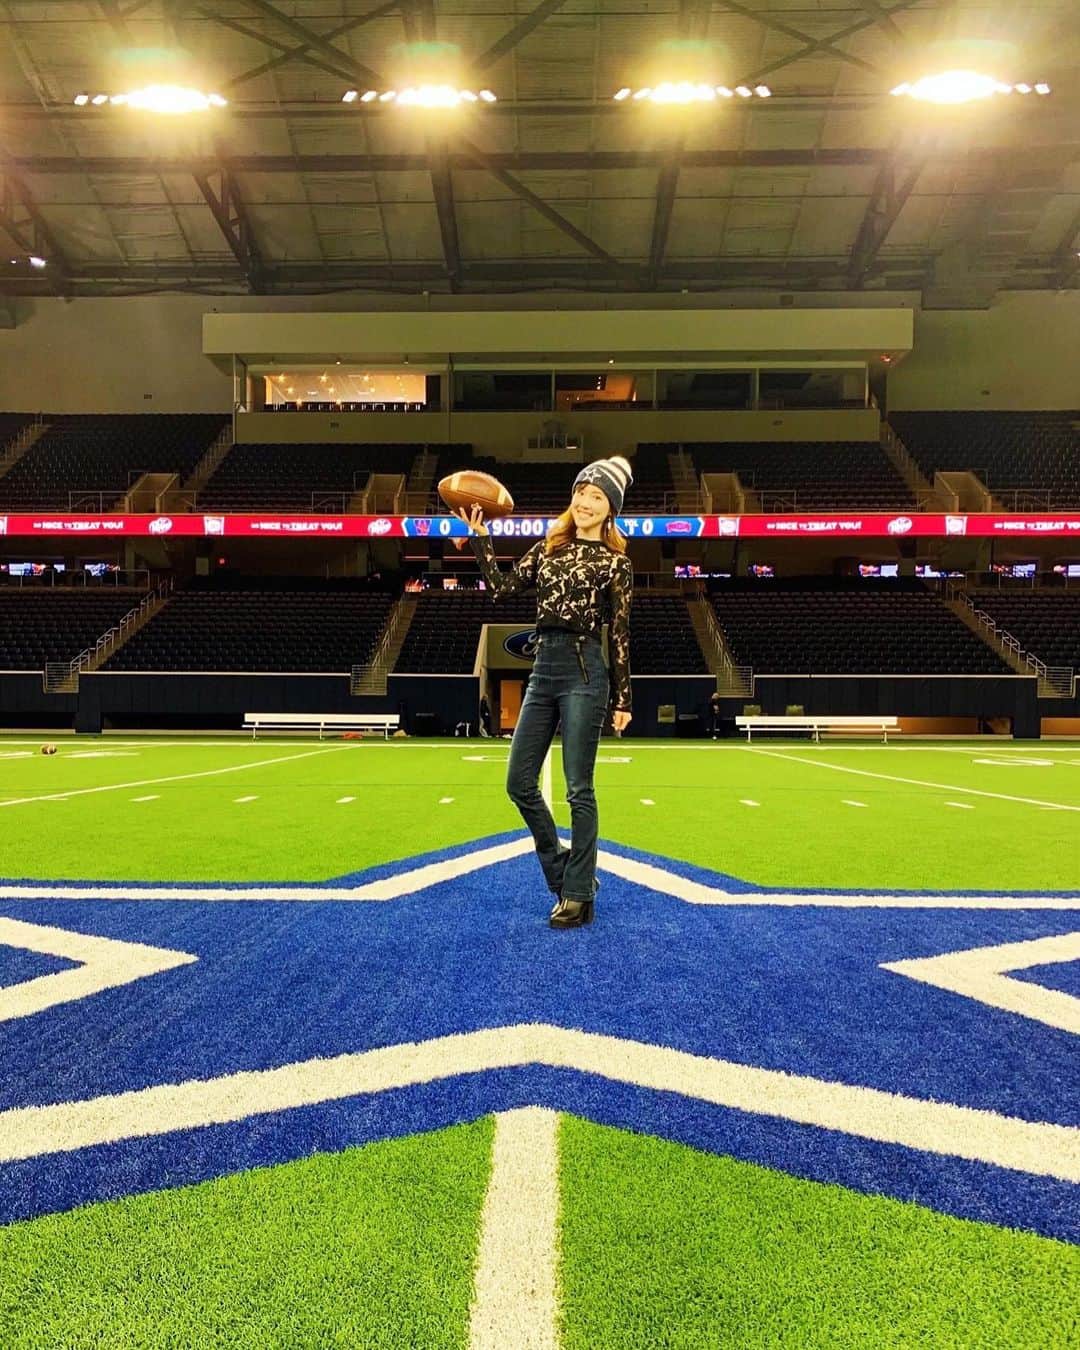 メロディー・モリタさんのインスタグラム写真 - (メロディー・モリタInstagram)「Flew out to Dallas for @NFL TV filming which aired in Japan!💙 Massive thanks to the @dallascowboys for providing an extensive VIP tour of The Star and Cowboys Fit!✨ As you can see in the 3rd & 4th slide, there's a star that's set right in front of the doors leading out to the practice field which says, "It is a privilege, not a right, to play, coach and work for the Dallas Cowboys." I learned that every single player and person involved with the team touches the star every day before heading out to practice which I thought was very inspiring.😊 The facility was so massive that we unfortunately could not include everything we filmed, but it was super cool to report on my first cryotherapy experience using the same exact machine the players use as well! I love learning about the BTS of recovery/body conditioning which is crucial for maintaining the physique of the best athletes in the world.  It was such a pleasure seeing and working with the Dallas Cowboys team again! I just got back from a different city for more TV filming and can't wait to share all of that with you as well🙌 Hope your week is off to an awesome start!⭐️ * 先日の「オードリーのNFL倶楽部」のテレビ放送では、ダラス・カウボーイズの本部施設の「The Star」と「Cowboys Fit」を取材＆紹介しました！😄 東京ドーム8個分の広さがあるThe Starは、NFLドラフトの時に使用する会議室、メニューが充実した選手たちの豪華な食堂、観客席付きの屋内練習場などなど、たくさんの素晴らしいエリアがあります。 * 3＆4枚目の外の練習フィールドに繋がっているドアの前に置かれたスターには、"It is a privilege, not a right, to play, coach and work for the Dallas Cowboys." （ダラス・カウボーイズでプレーする、コーチする、働くことは権利ではなく、名誉である）と書かれていて、広報の方から「選手はもちろんチームに関わる全ての人が、毎日必ずこのスターに触れてから外の練習フィールドへ行く」と聞いて、チーム愛に感動しました。 * あまりにも広大な施設のため、放送では紹介しきれなかった部分が沢山あったのですが、Cowboys Fitでは、選手も使うクライオセラピー（凍結療法）のマシーンも体験させて頂きました（7枚目）！😳 選手たちがこの様な機械で患部＆全身を冷やし、痛みを緩和しながら、毎回の激しい試合いを戦っていると思うと、NFLの凄さと厳しさをまた違う目線から改めて知ることができました。 * 次回もNFLの現地での盛り上がりや＆裏側をお伝えします。どうぞお楽しみに‼️😊 #NFL #DallasCowboys #TV #NFLclub #カウボーイズ」11月26日 11時38分 - melodeemorita